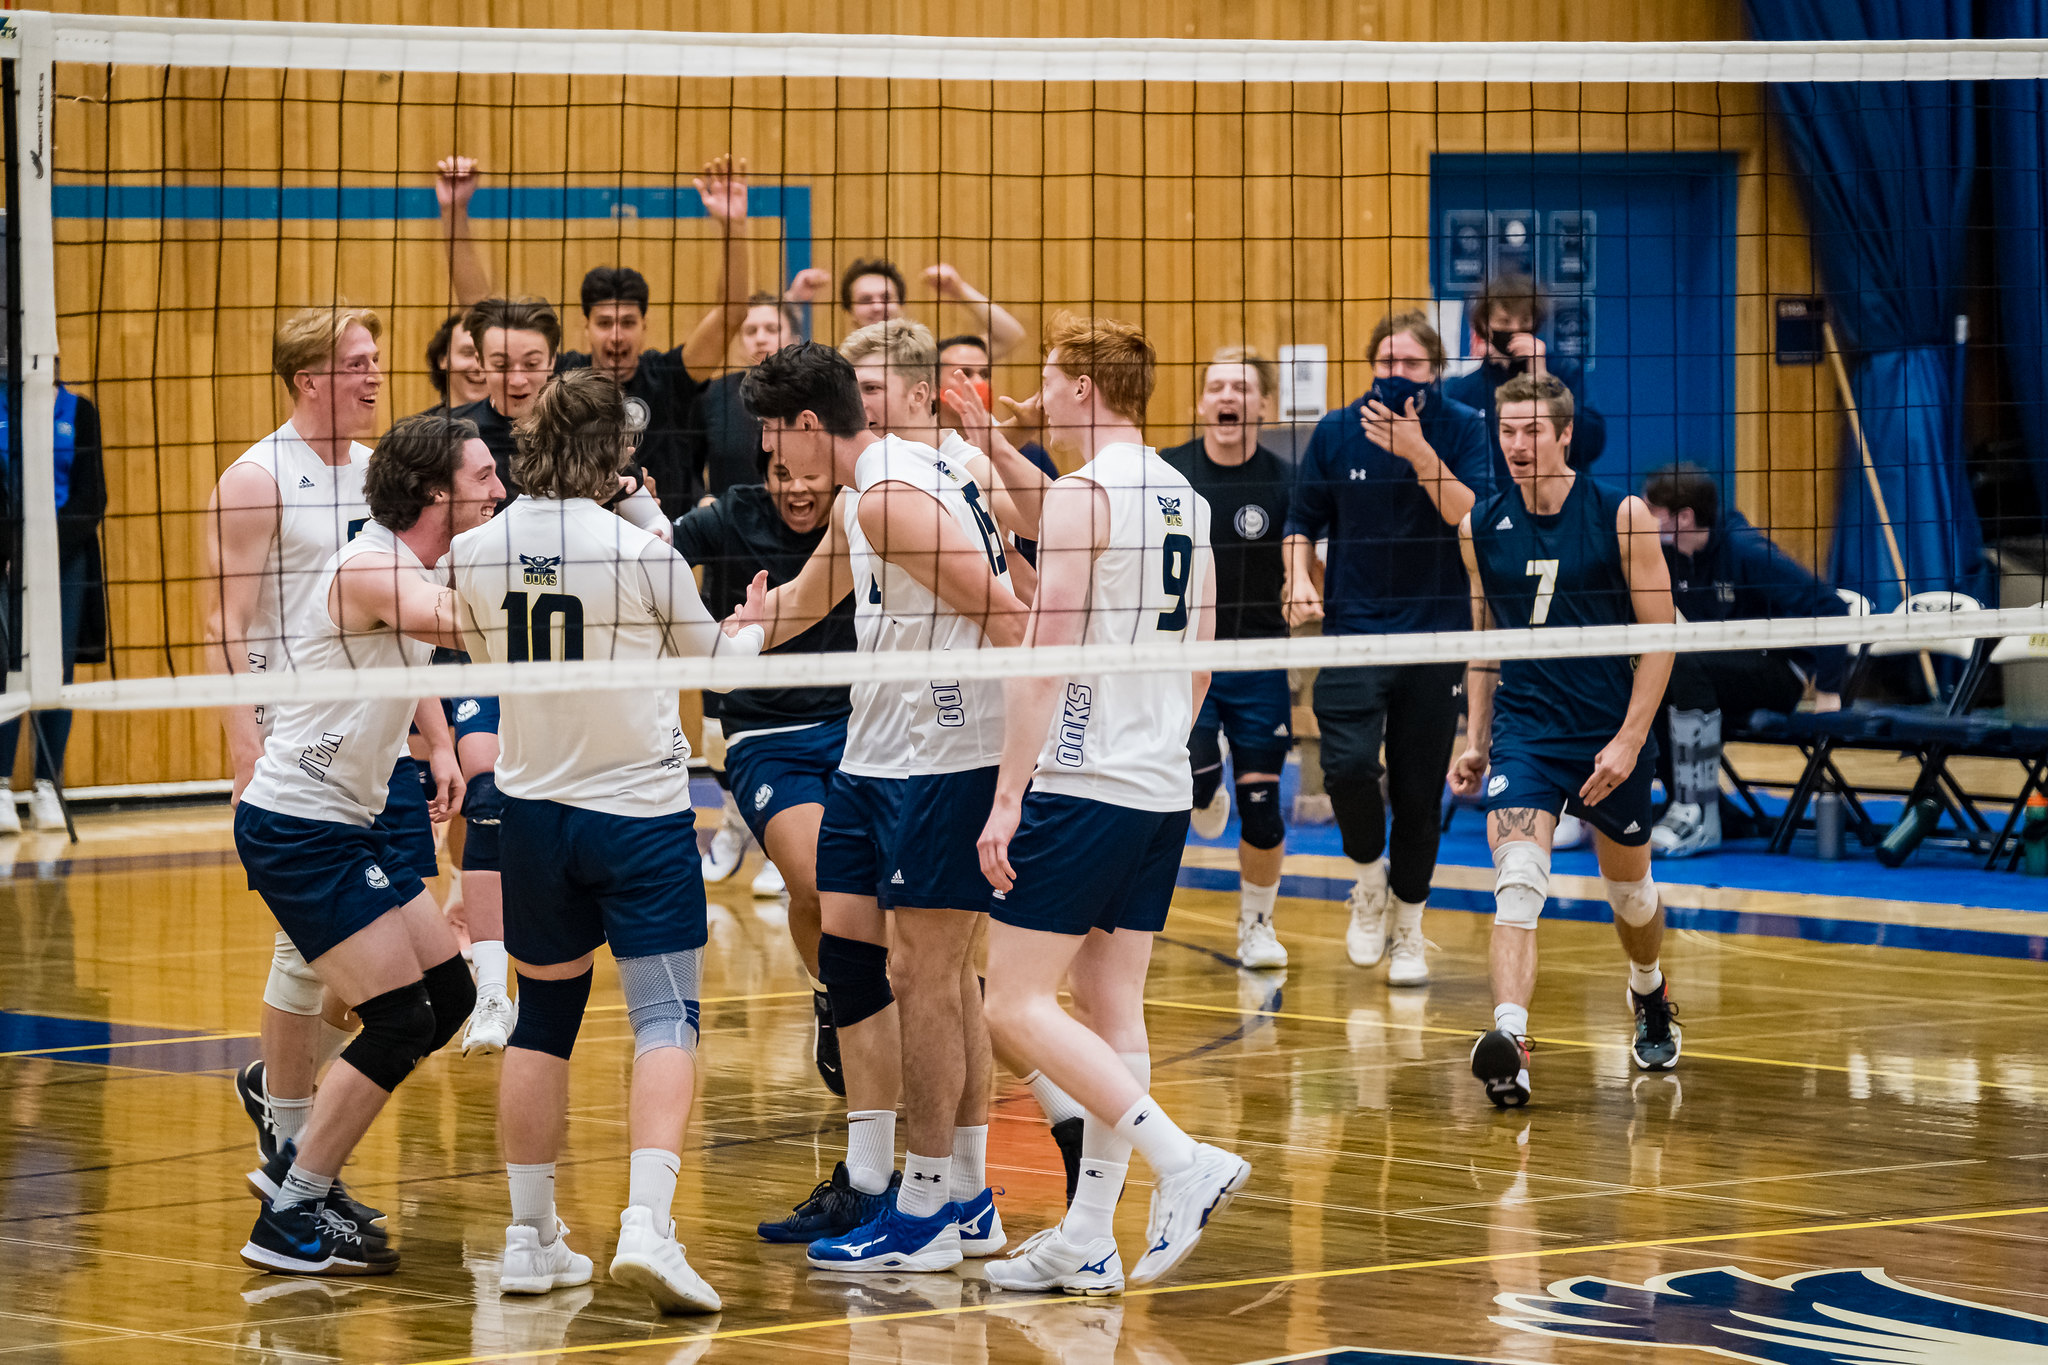 NAIT men's volleyball team celebrates on the court